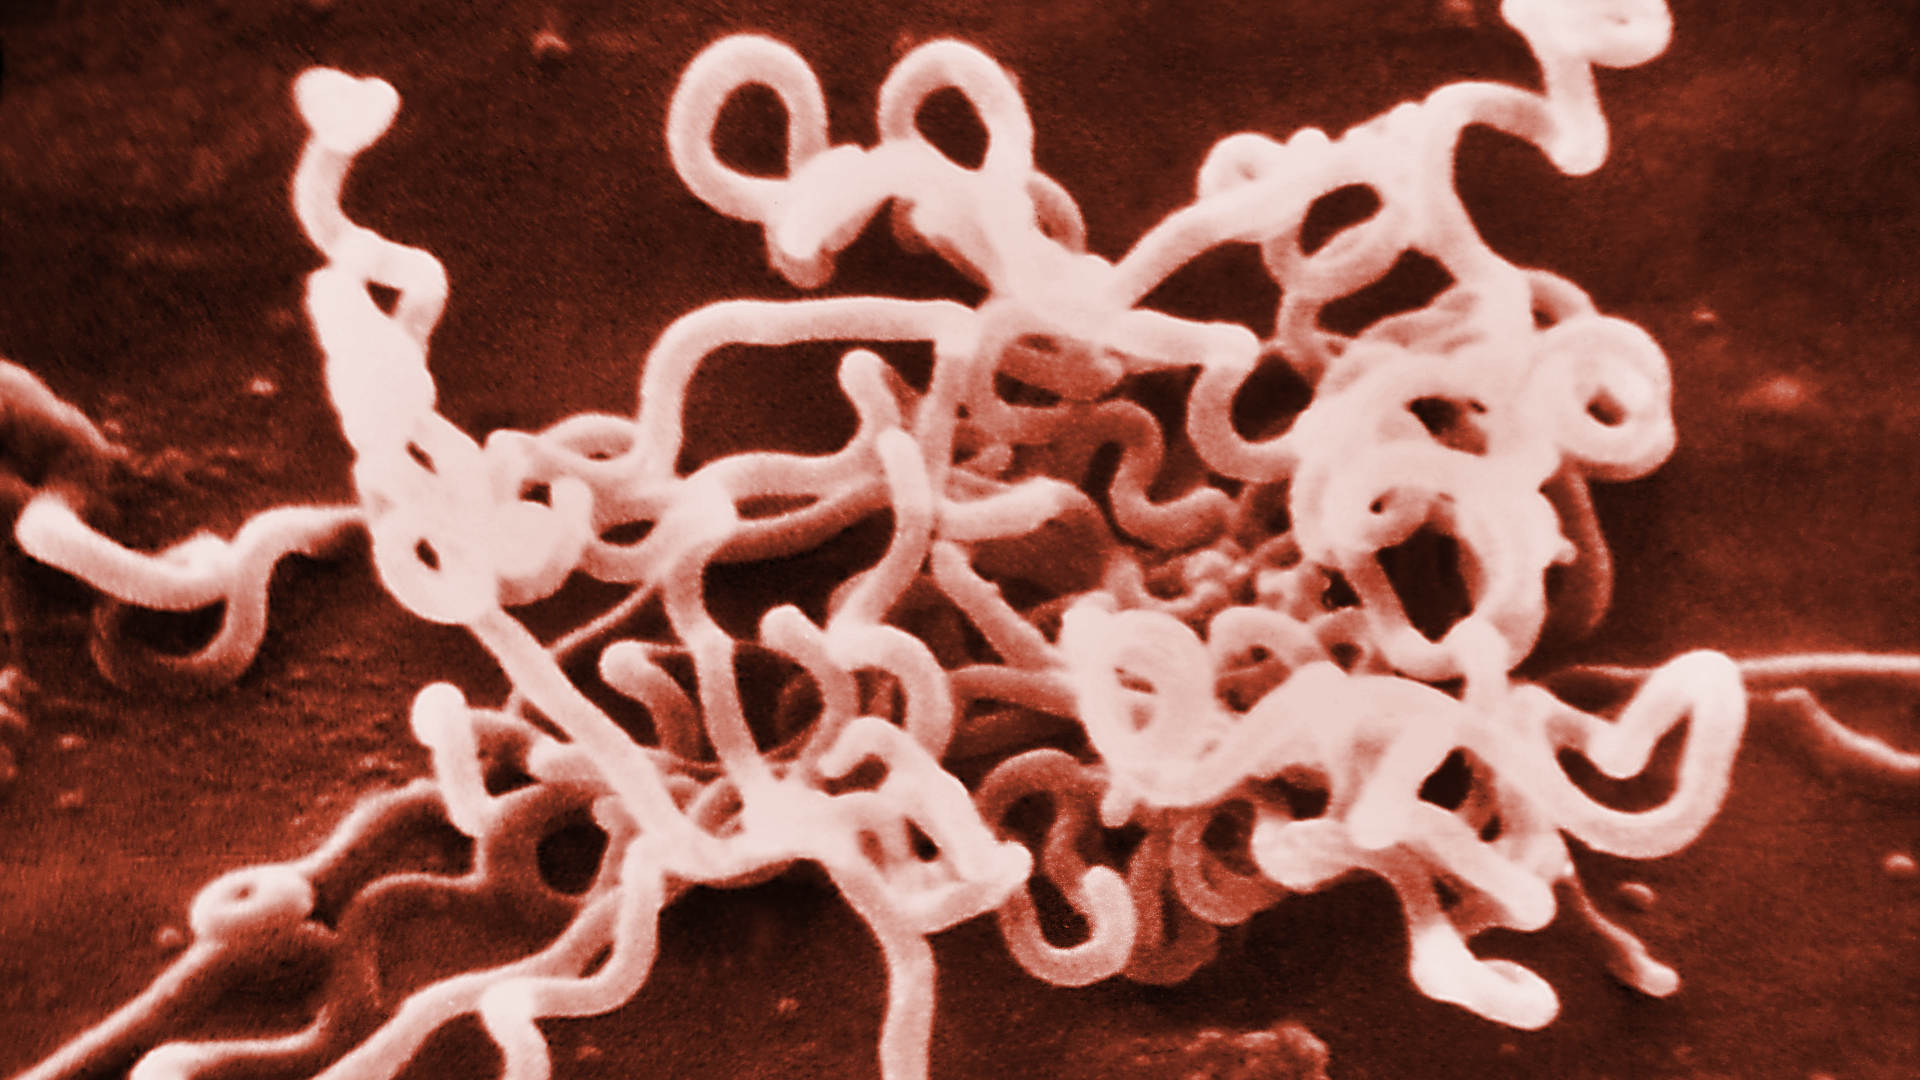 A false-color electron microscope image of the spiral-shaped Treponema pallidum bacteria, which causes syphilis.